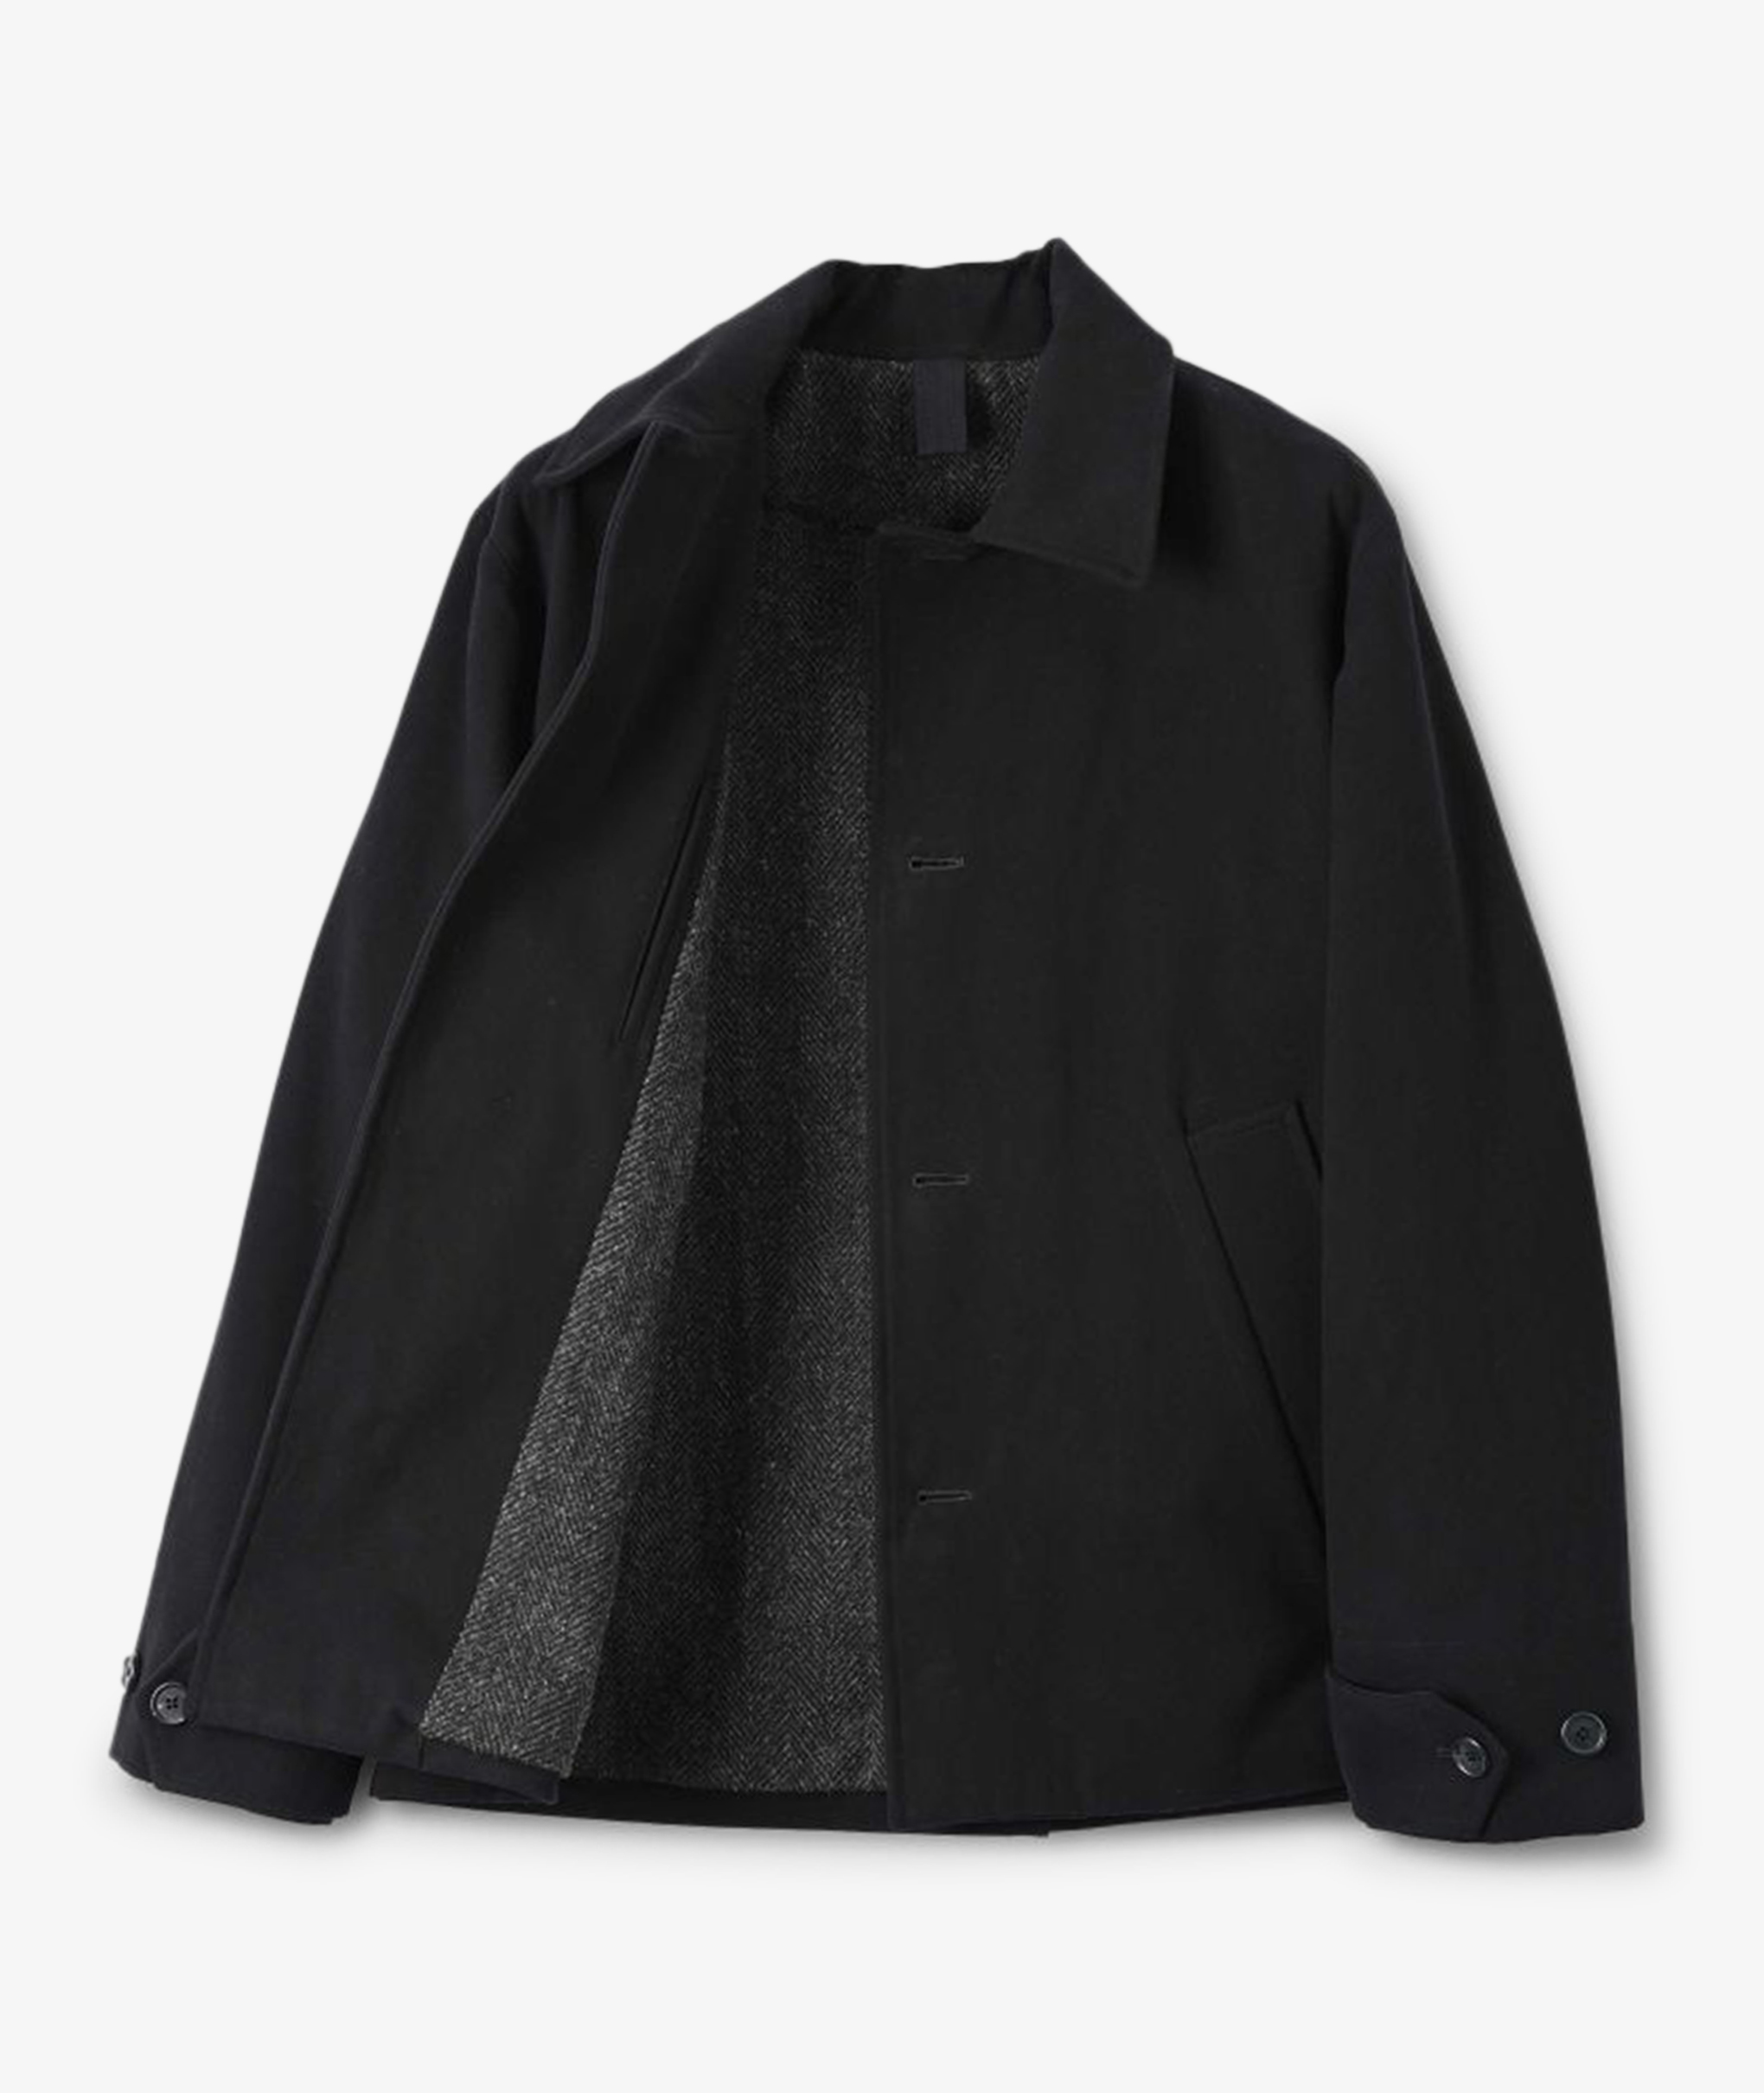 Norse Store | Shipping Worldwide - Jackets - Margaret Howell - Offset ...